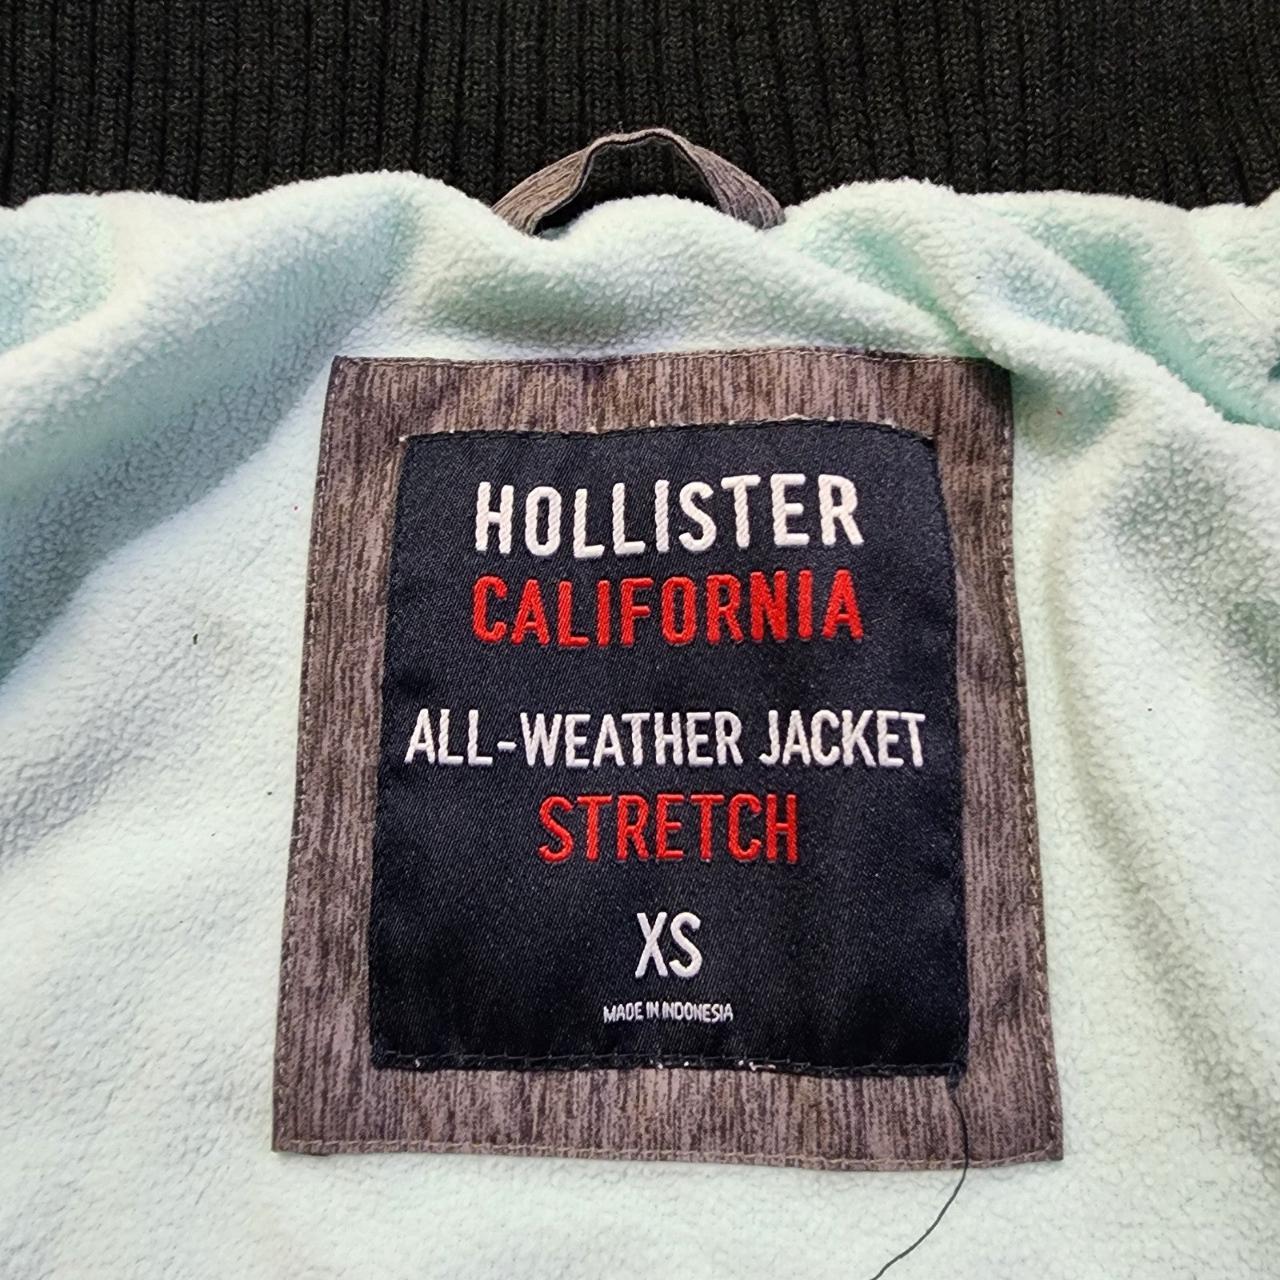 Hollister California All-Weather Hooded Jacket, Size XS, Colour grey